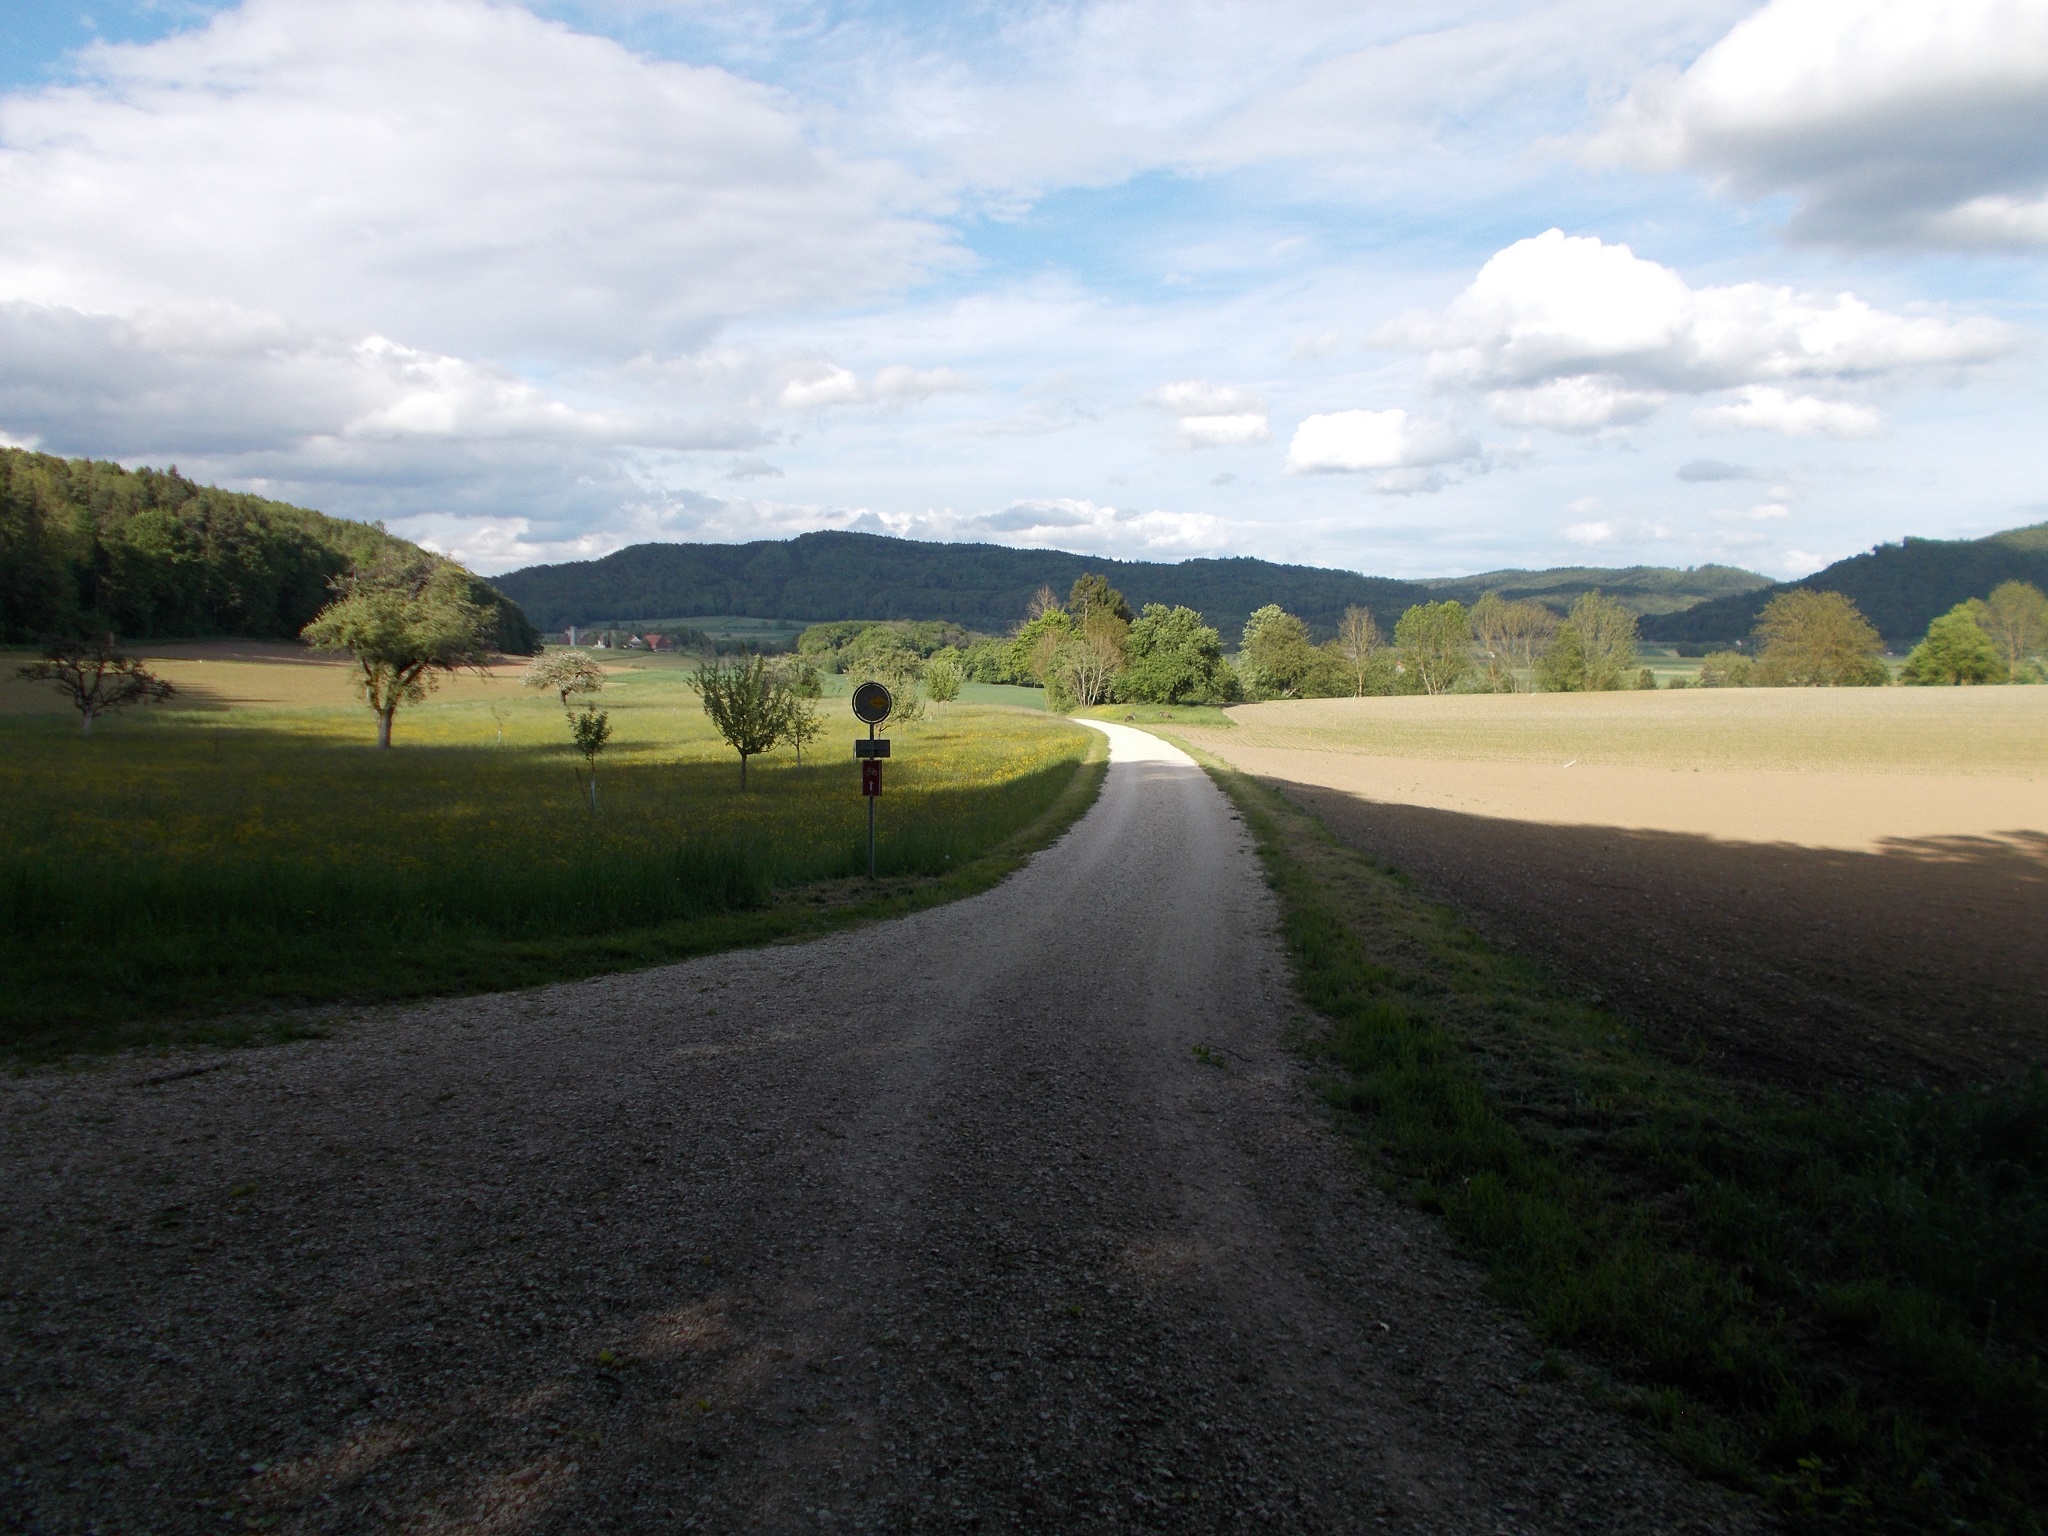 A gravel road leading through large open fields basking in the sunshine.